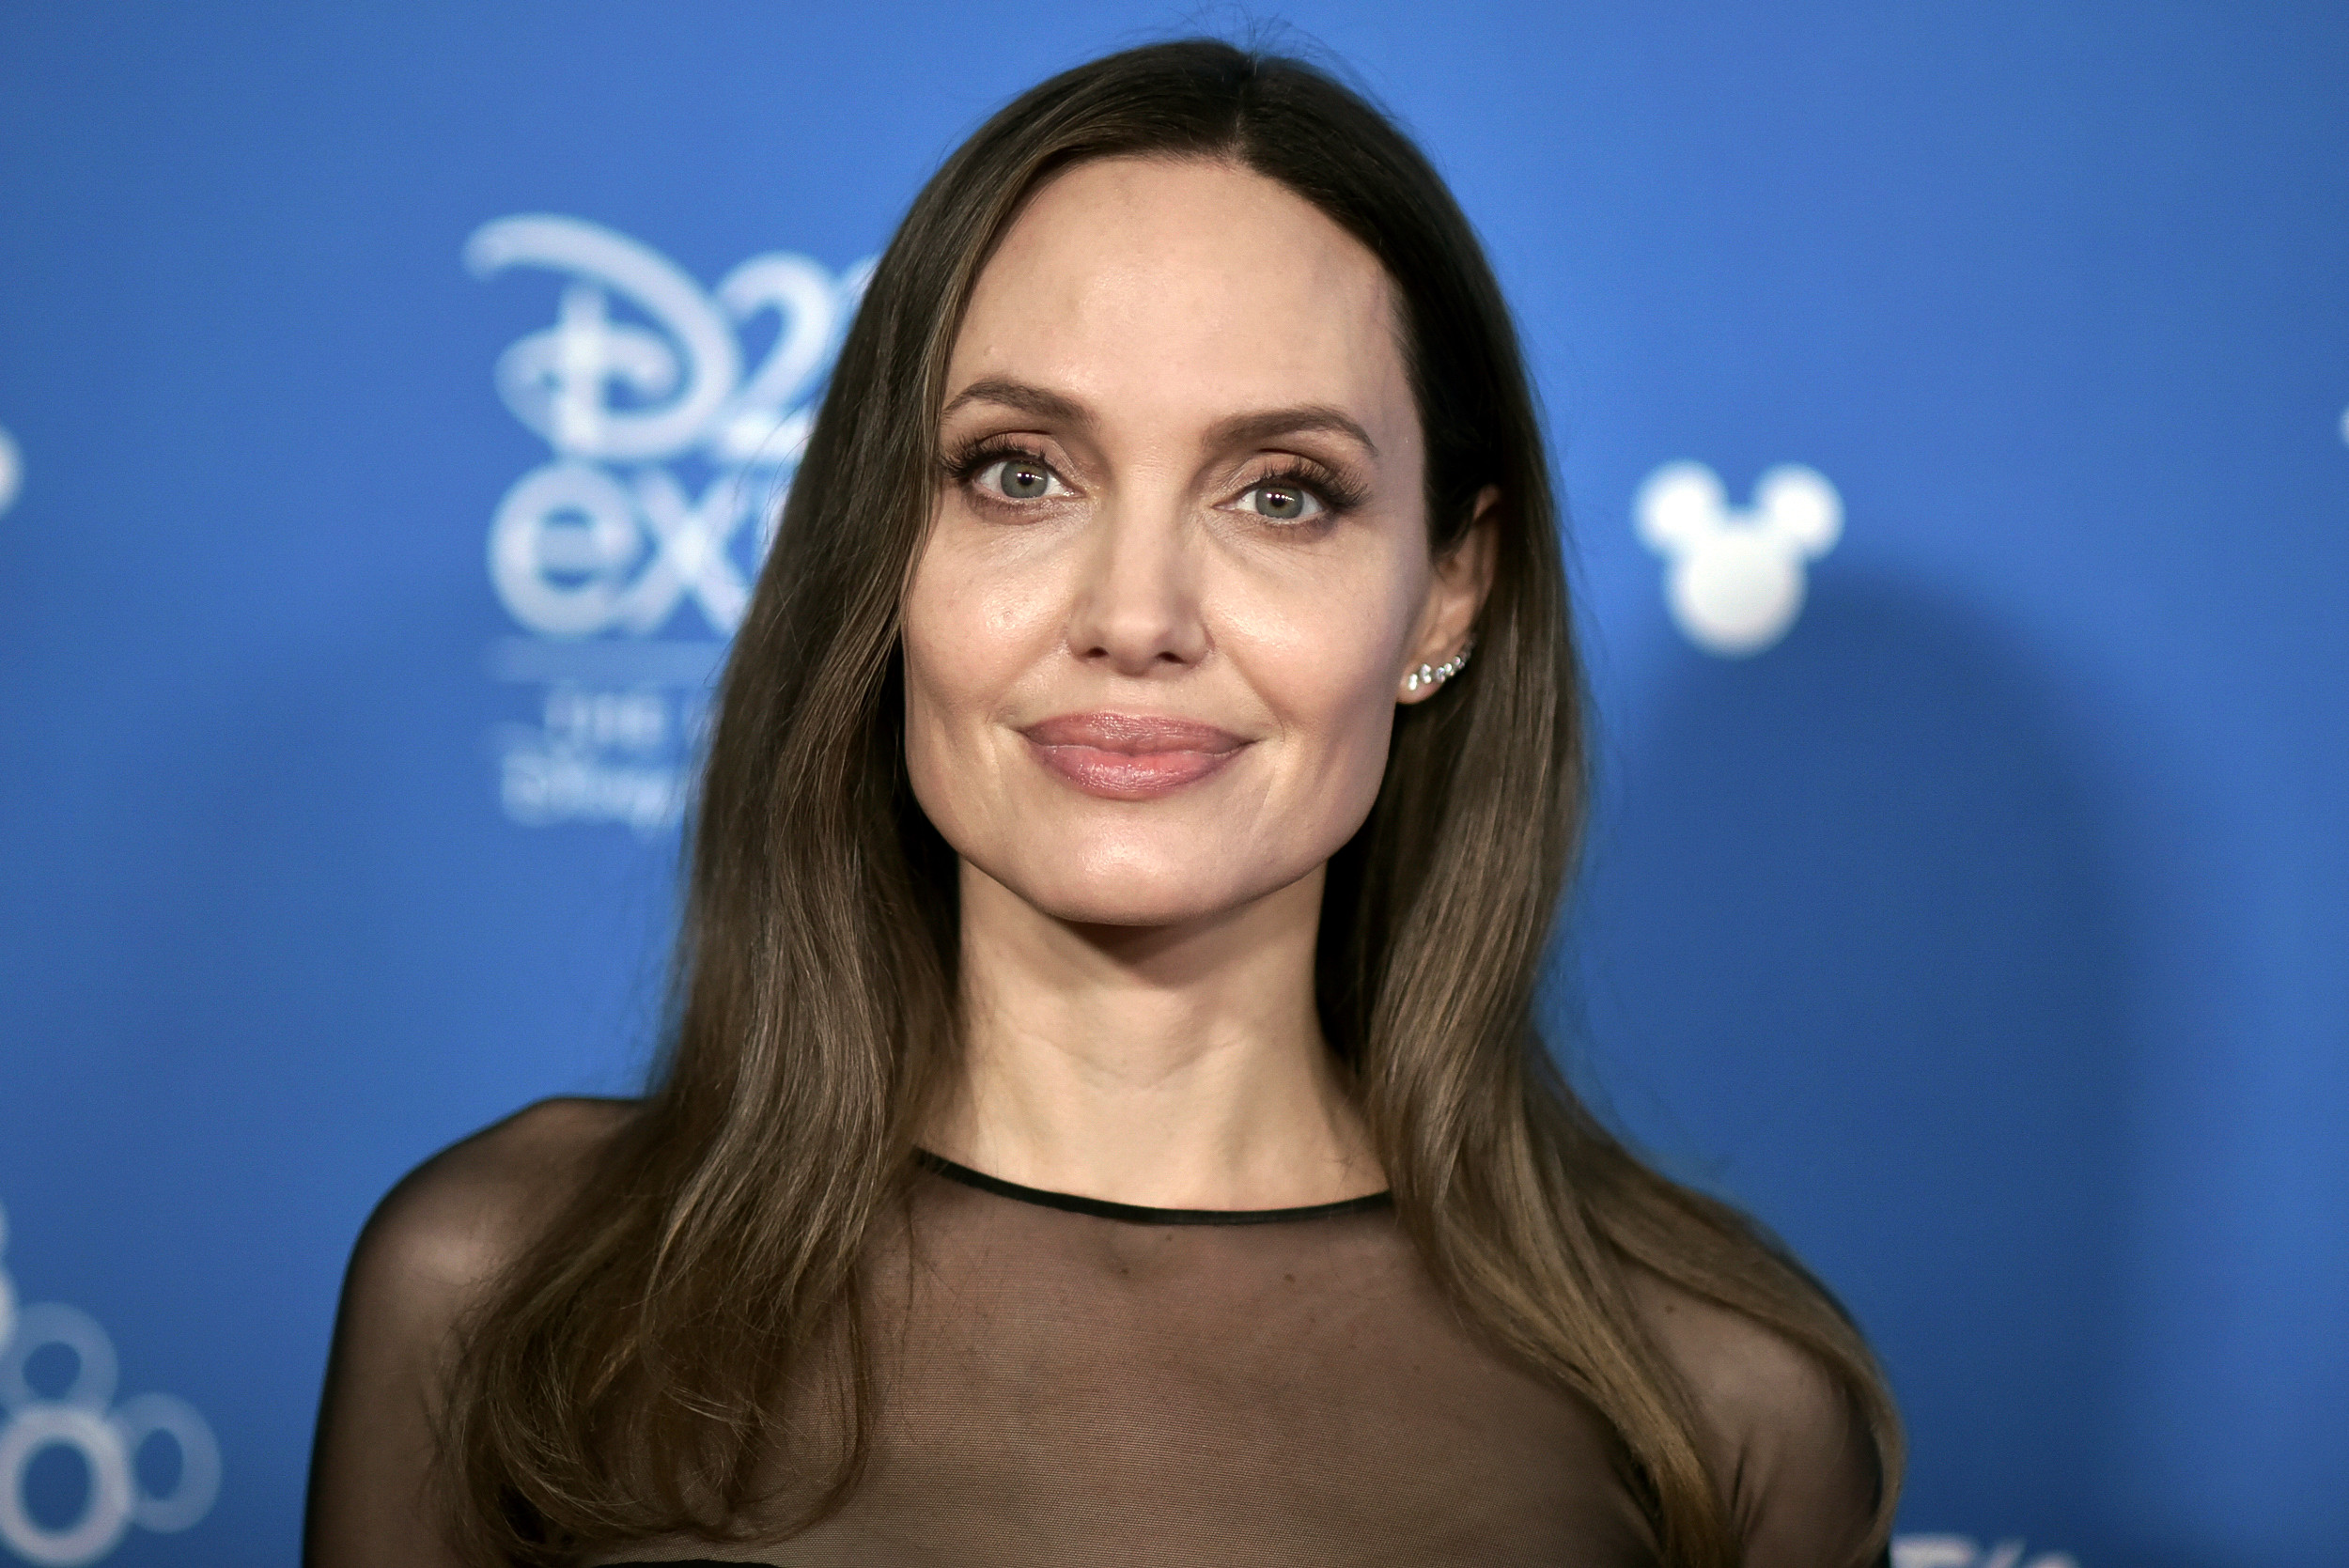 Angelina Jolie Reveals She Wants To Stay Abroad But Thanks To Ex-Husband Brad Pitt She Cannot; Details Inside